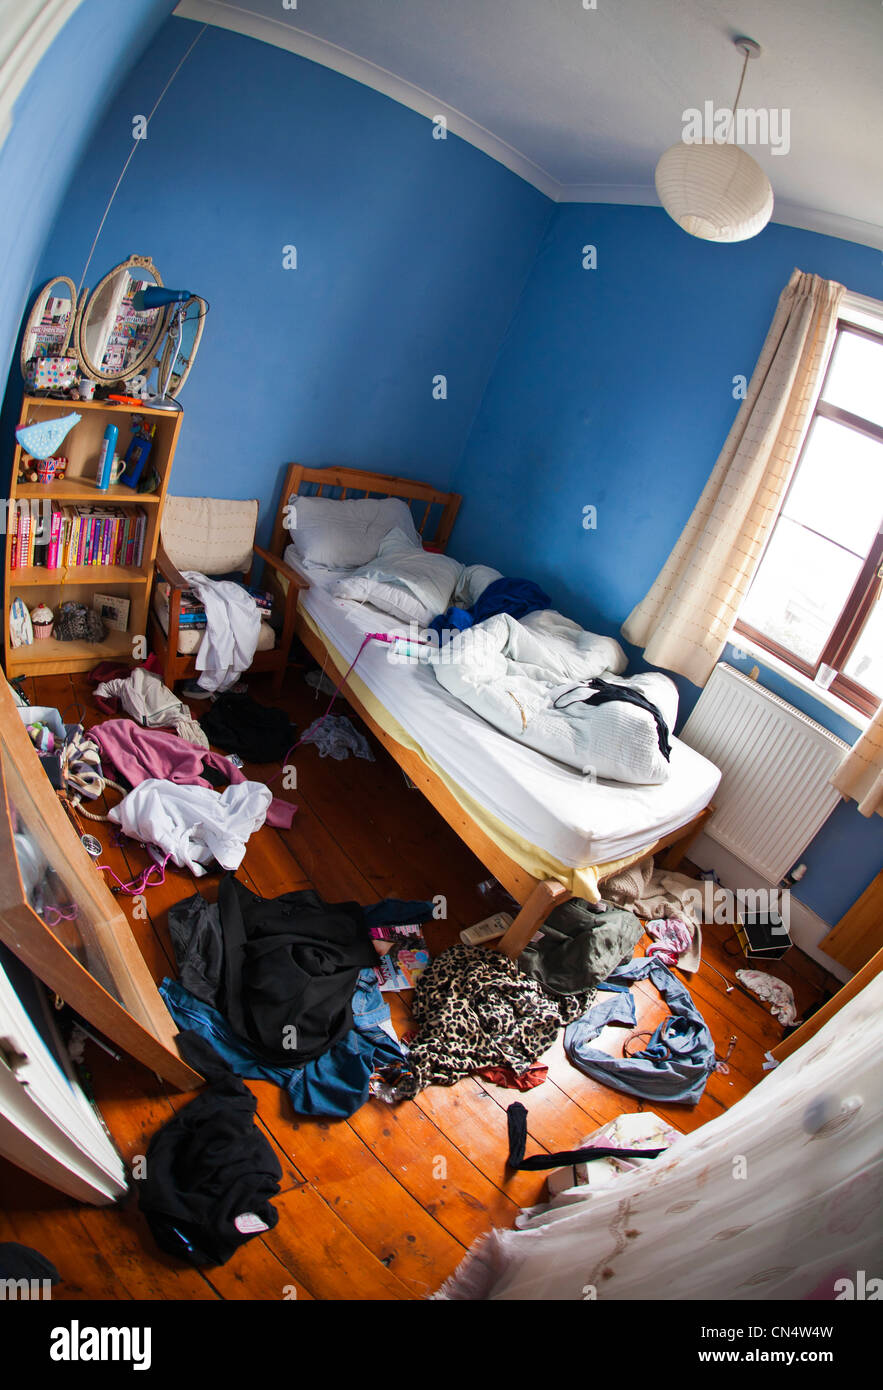 The messy, untidy bedroom of a teenage girl. Stock Photo